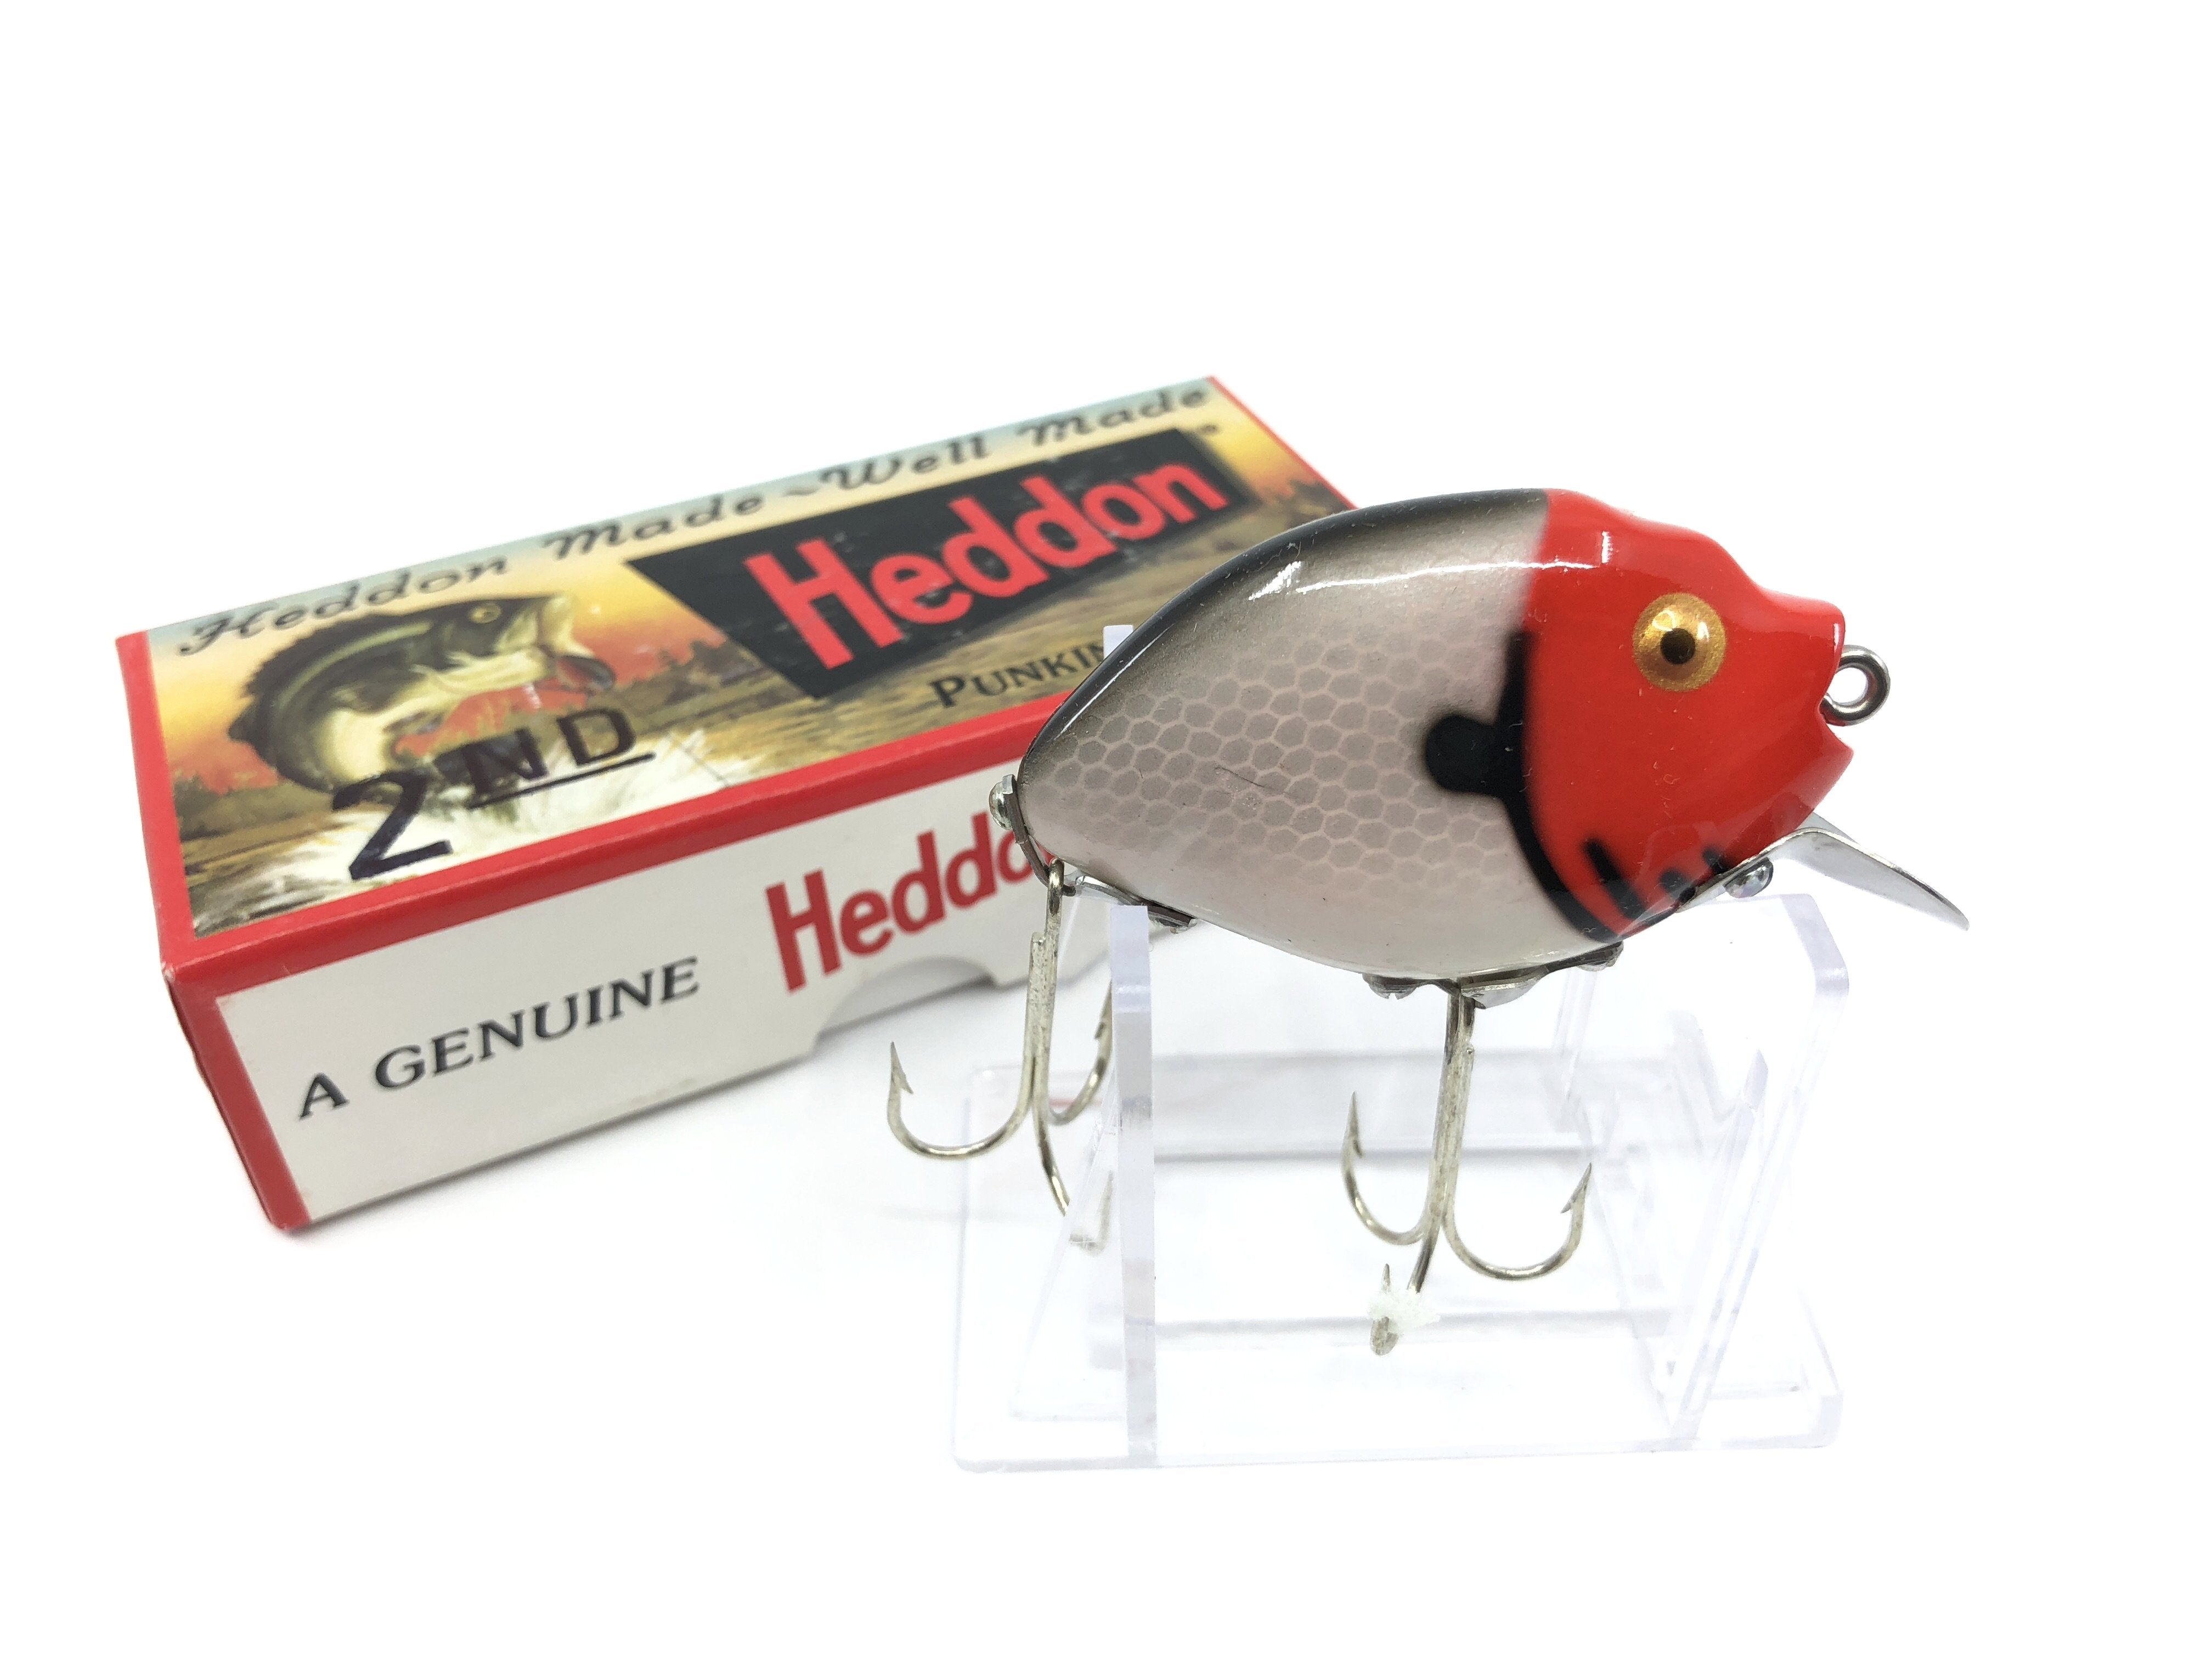 Heddon - Heddon Punkinseed Fishing Lures - Trainers4Me